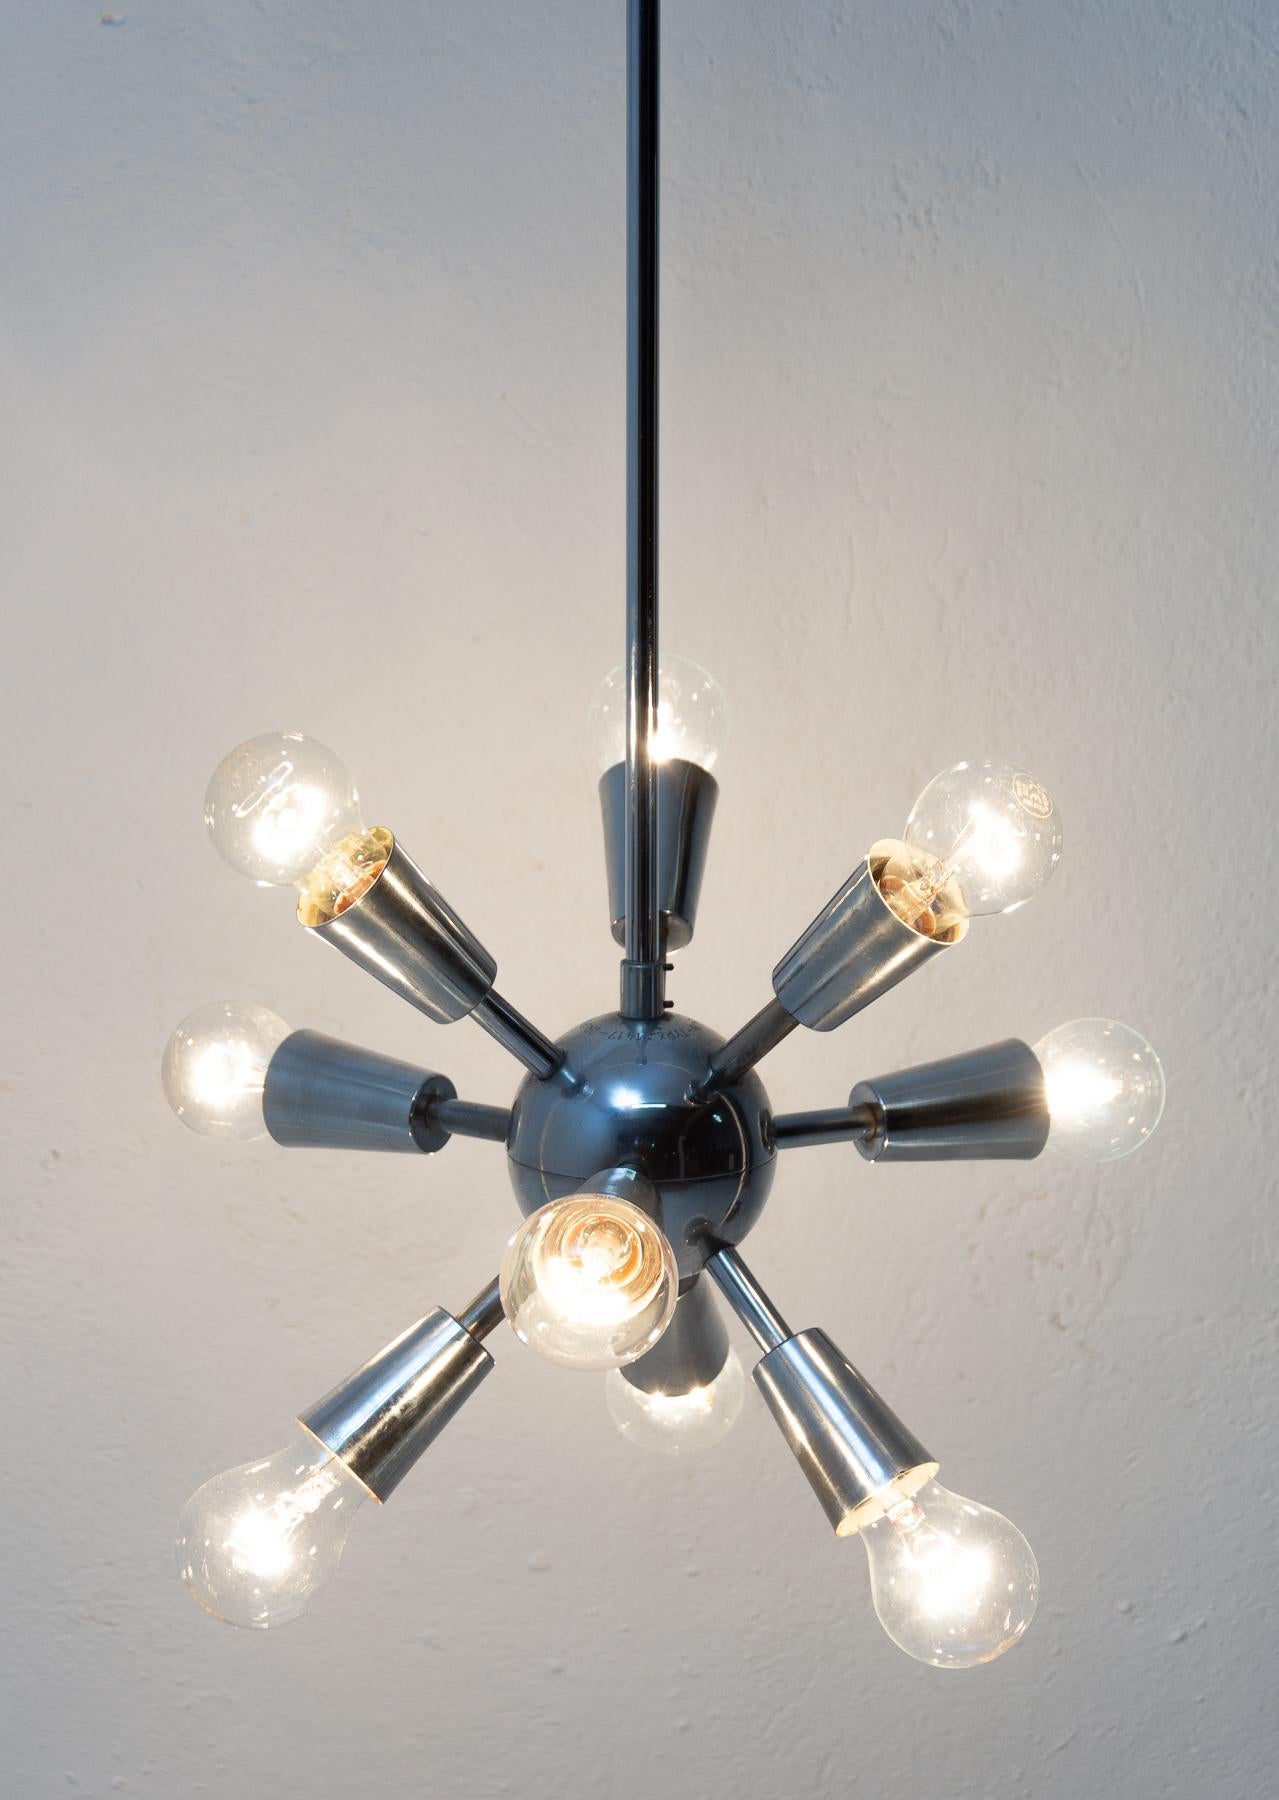 This Space Age Sputnik chandelier was made in the former Czechoslovakia by Drupol company in the 1960s. It features 10 chromed arms with E27 bulb socket. The chandelier is in very good vintage condition just bears a minor signs of age and using. It